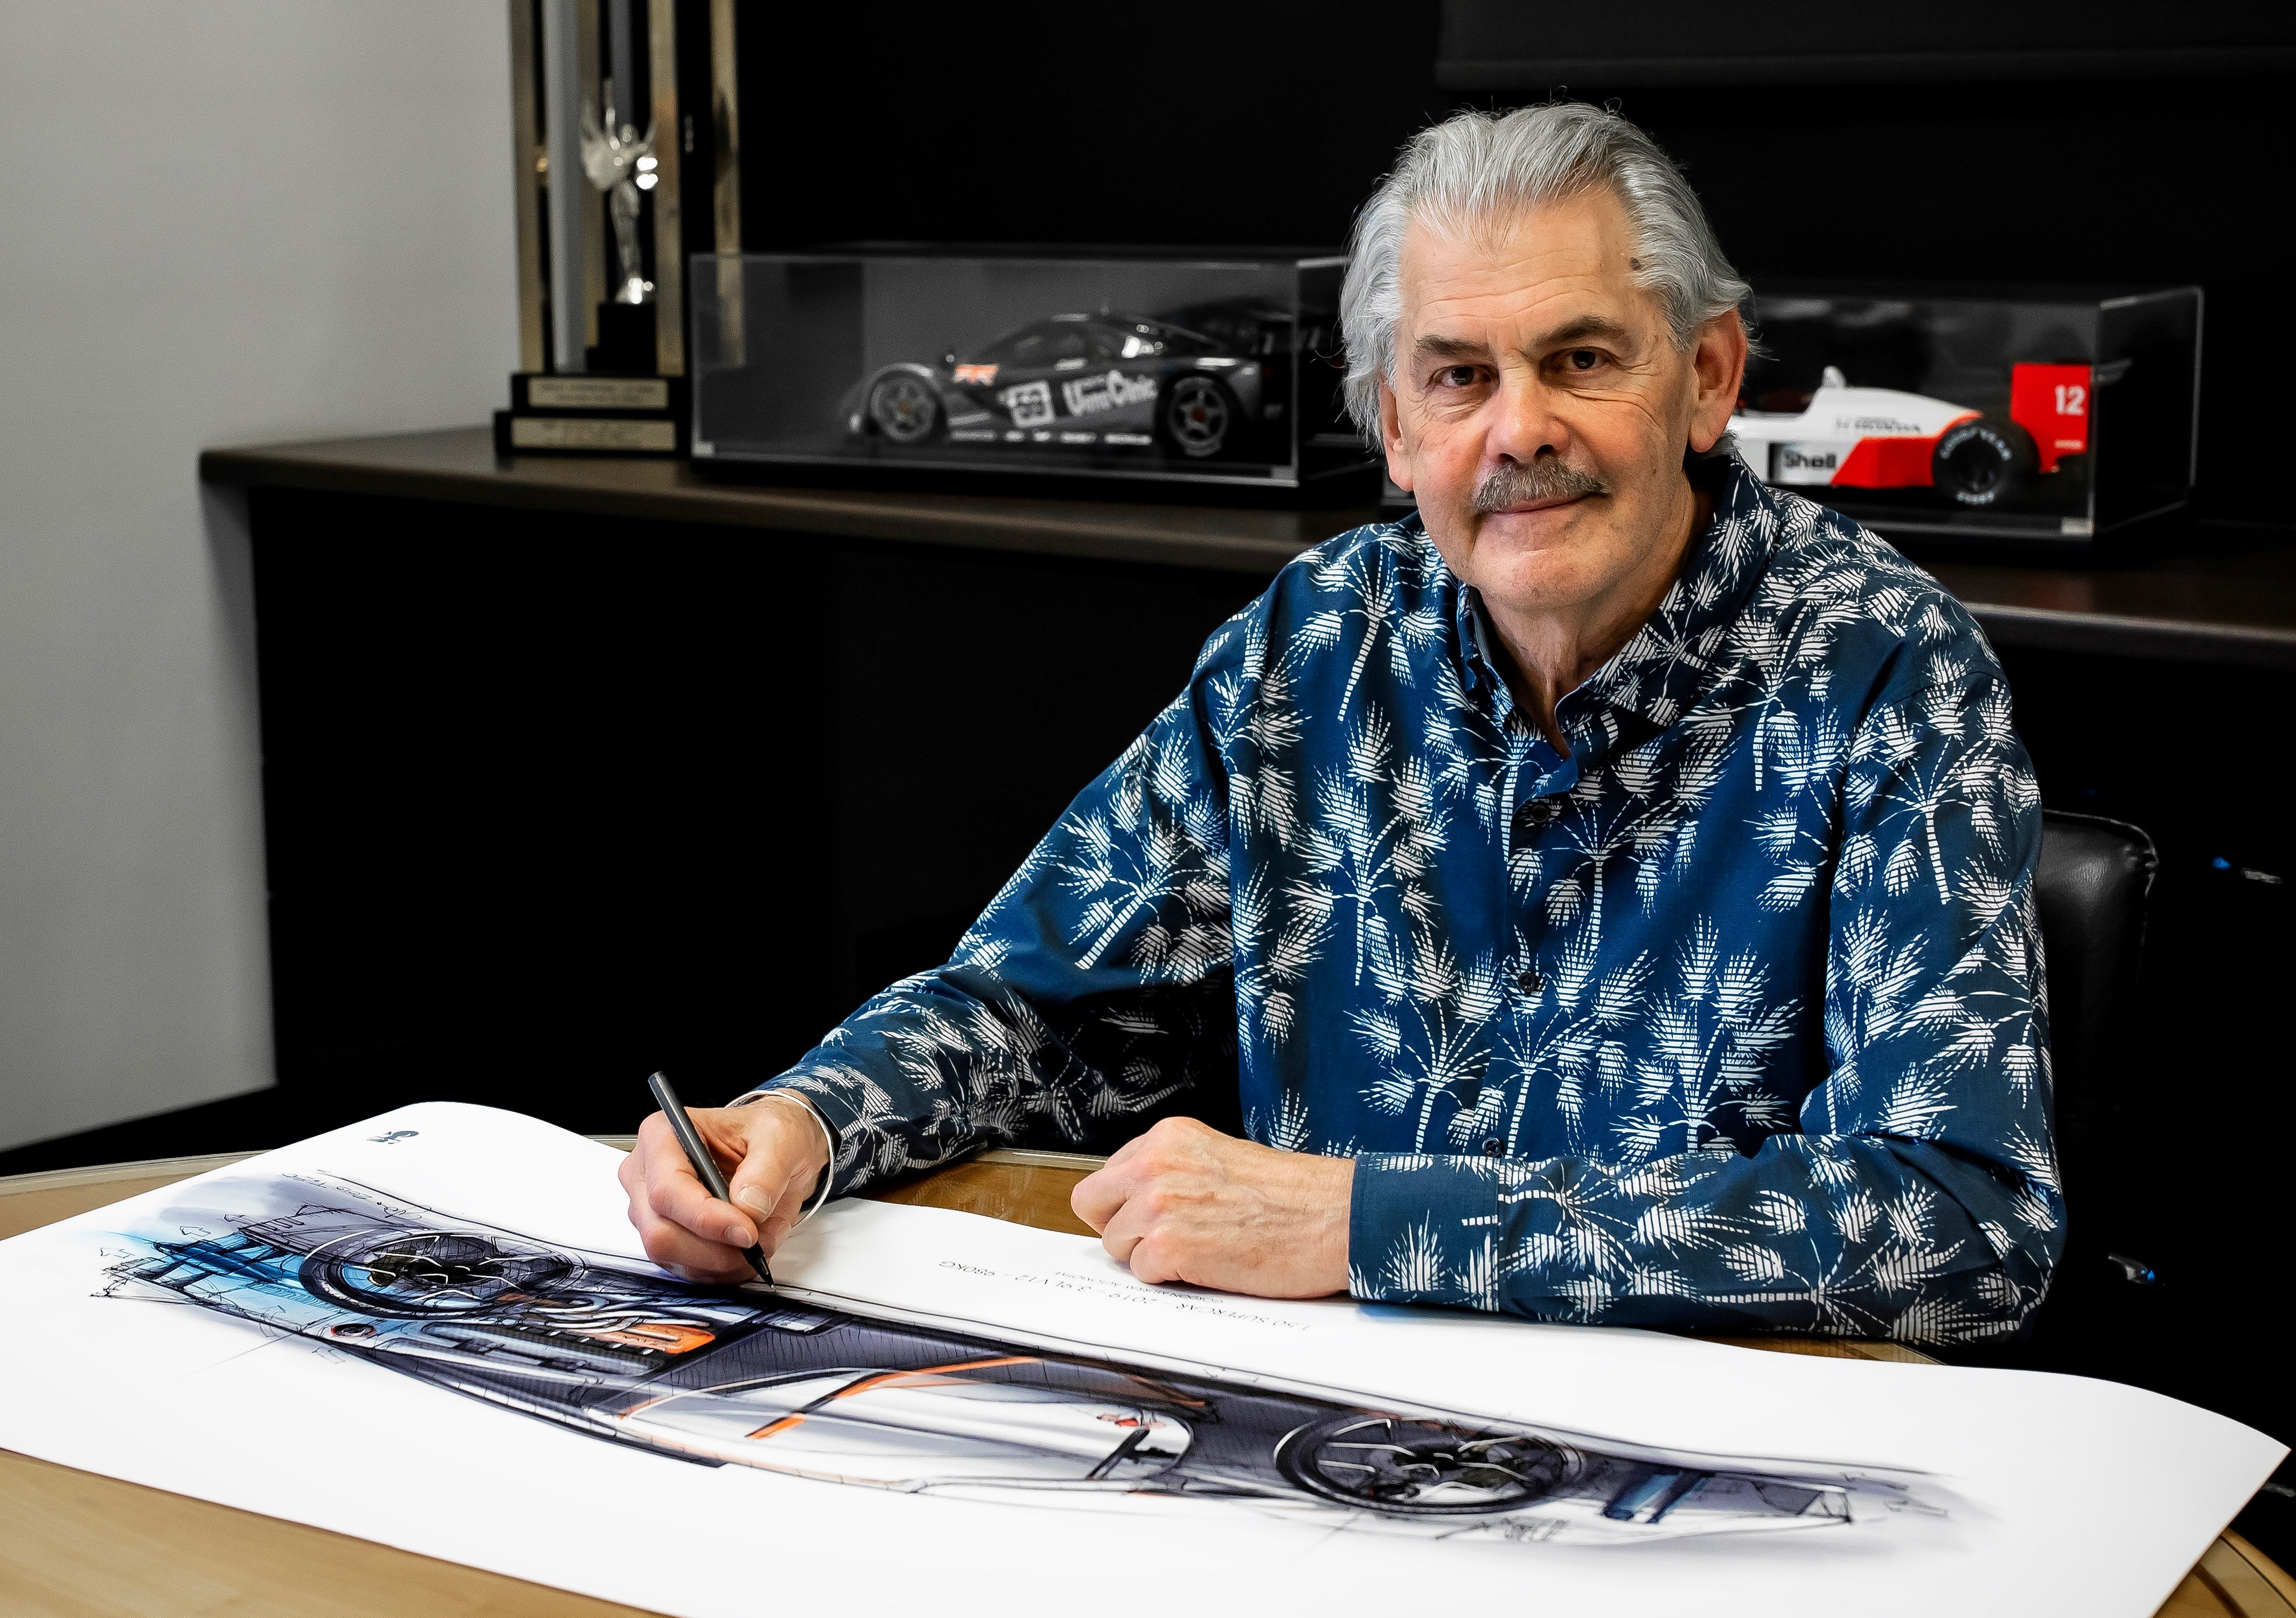 Cosworth, Cosworth GMA V12 to propel Gordon Murray’s T.50 supercar, ClassicCars.com Journal